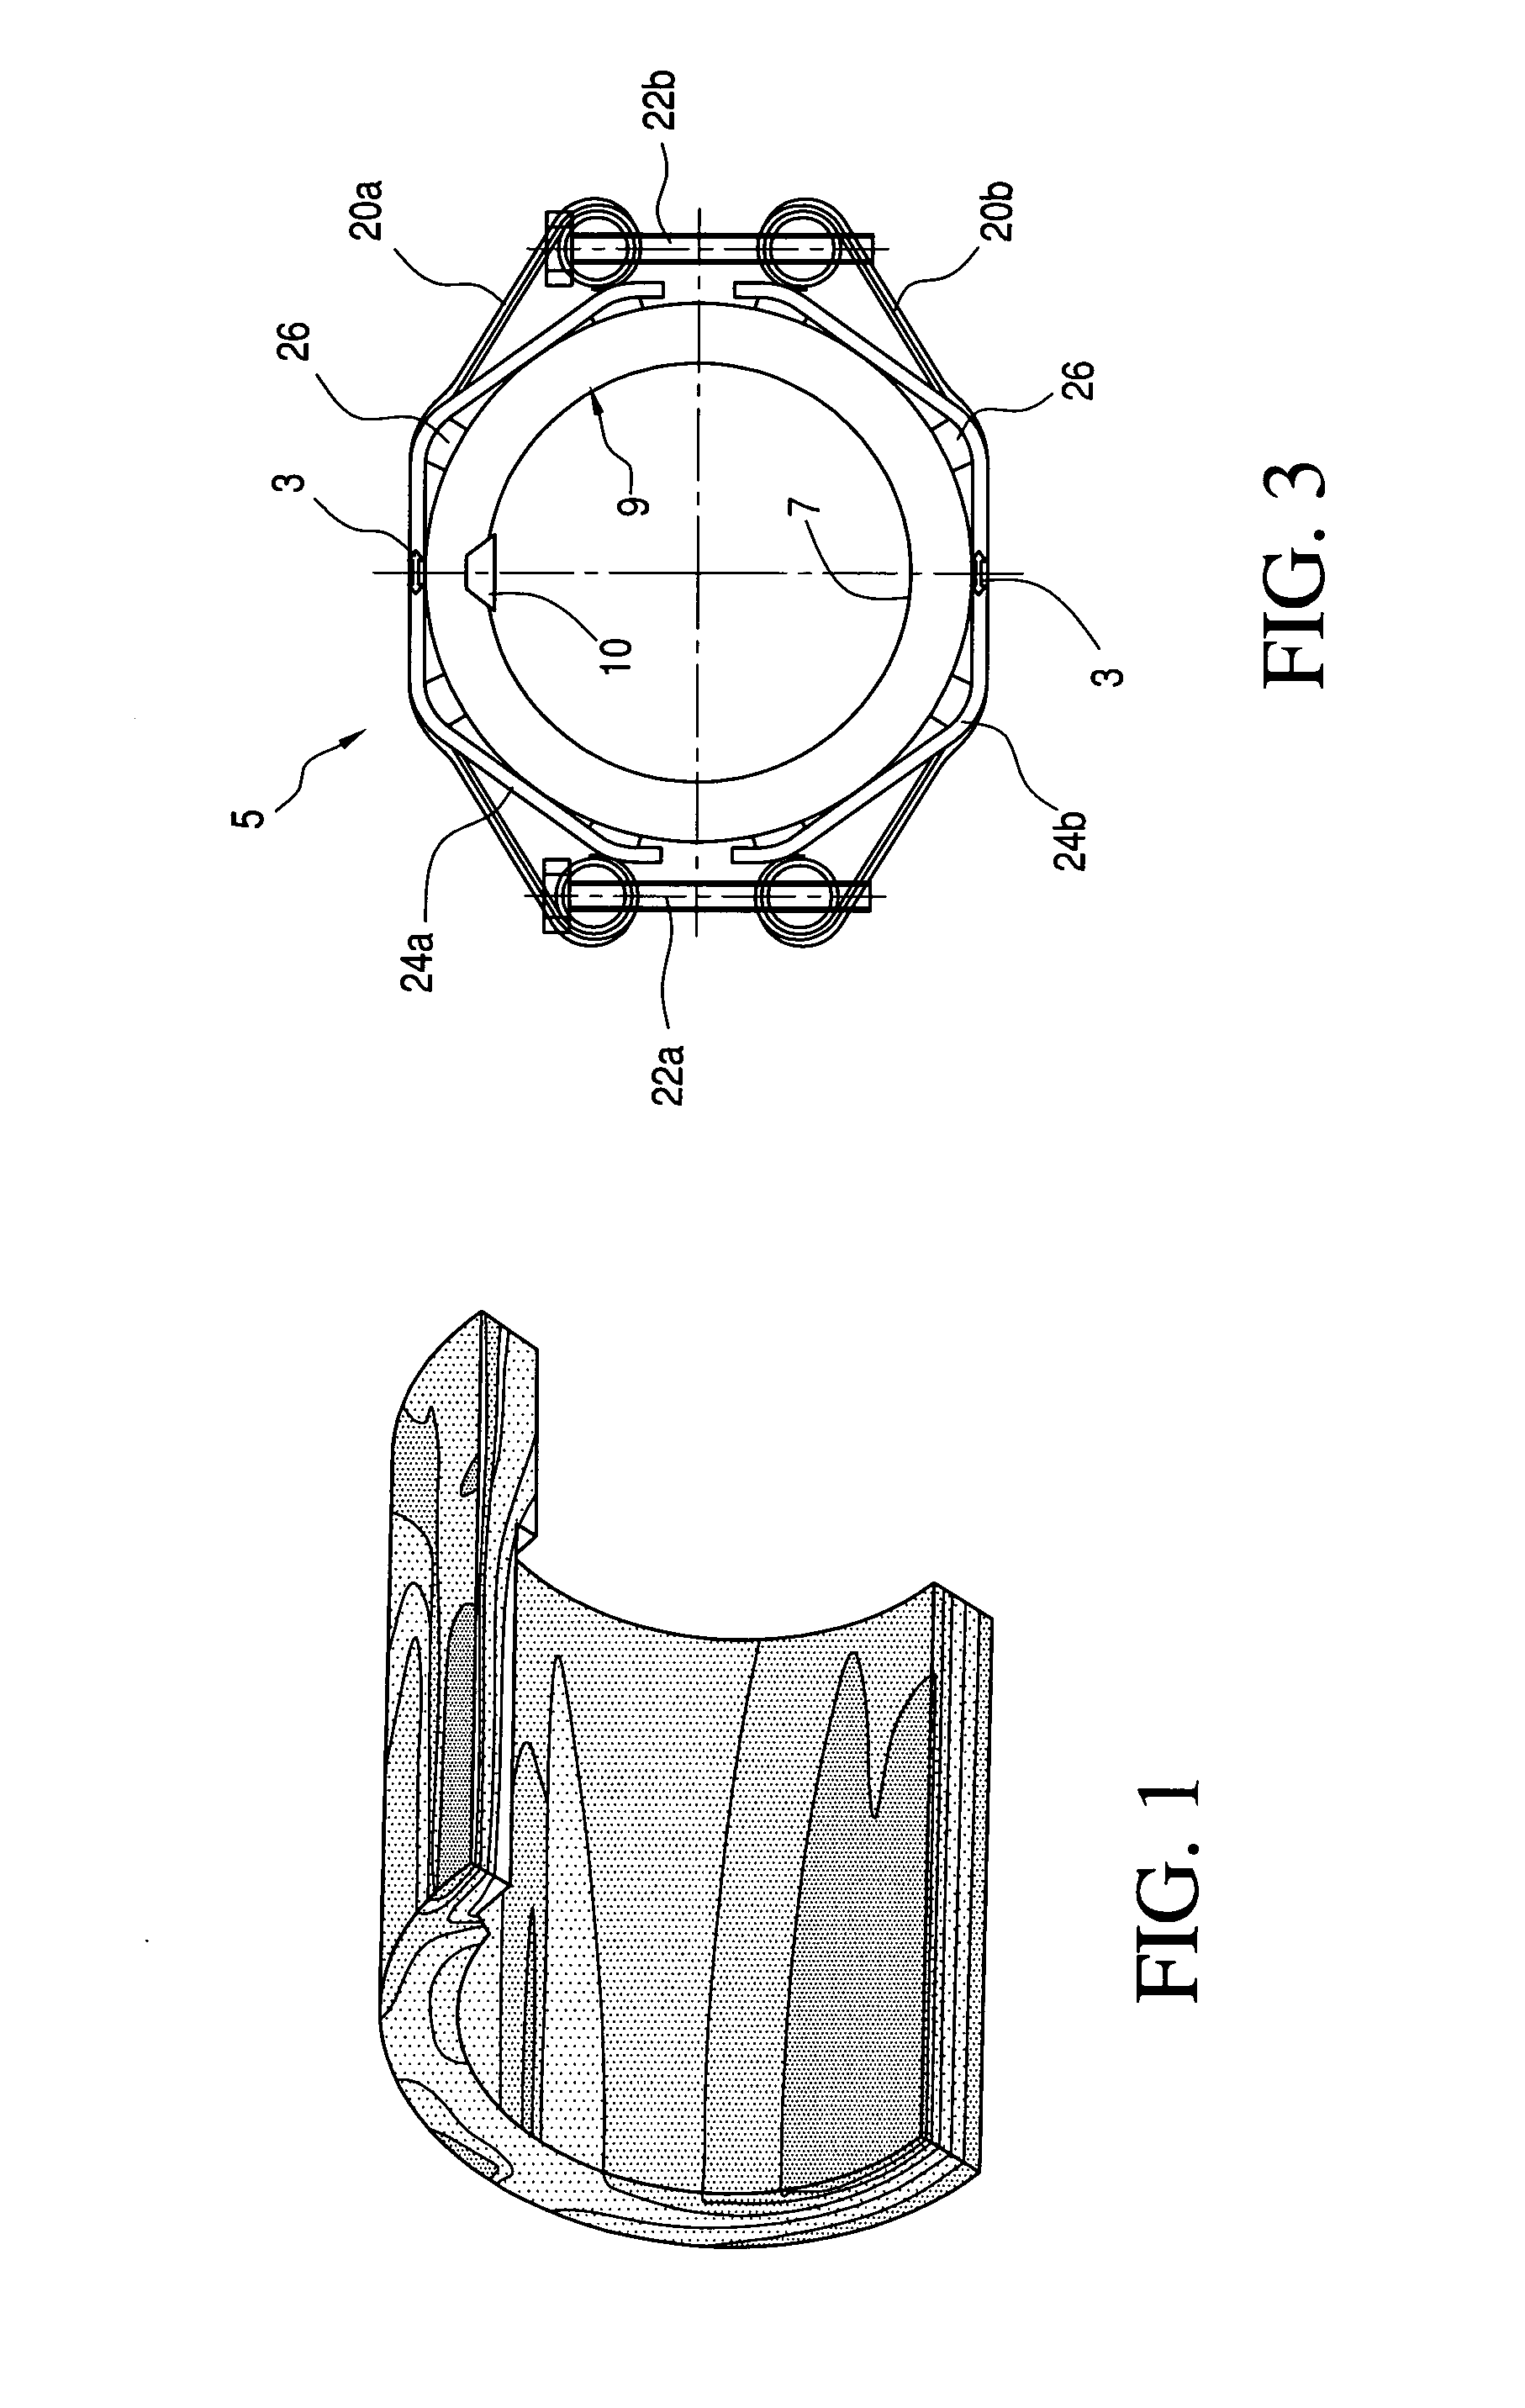 System and method for uniform and localized wall thickness measurement using fiber optic sensors